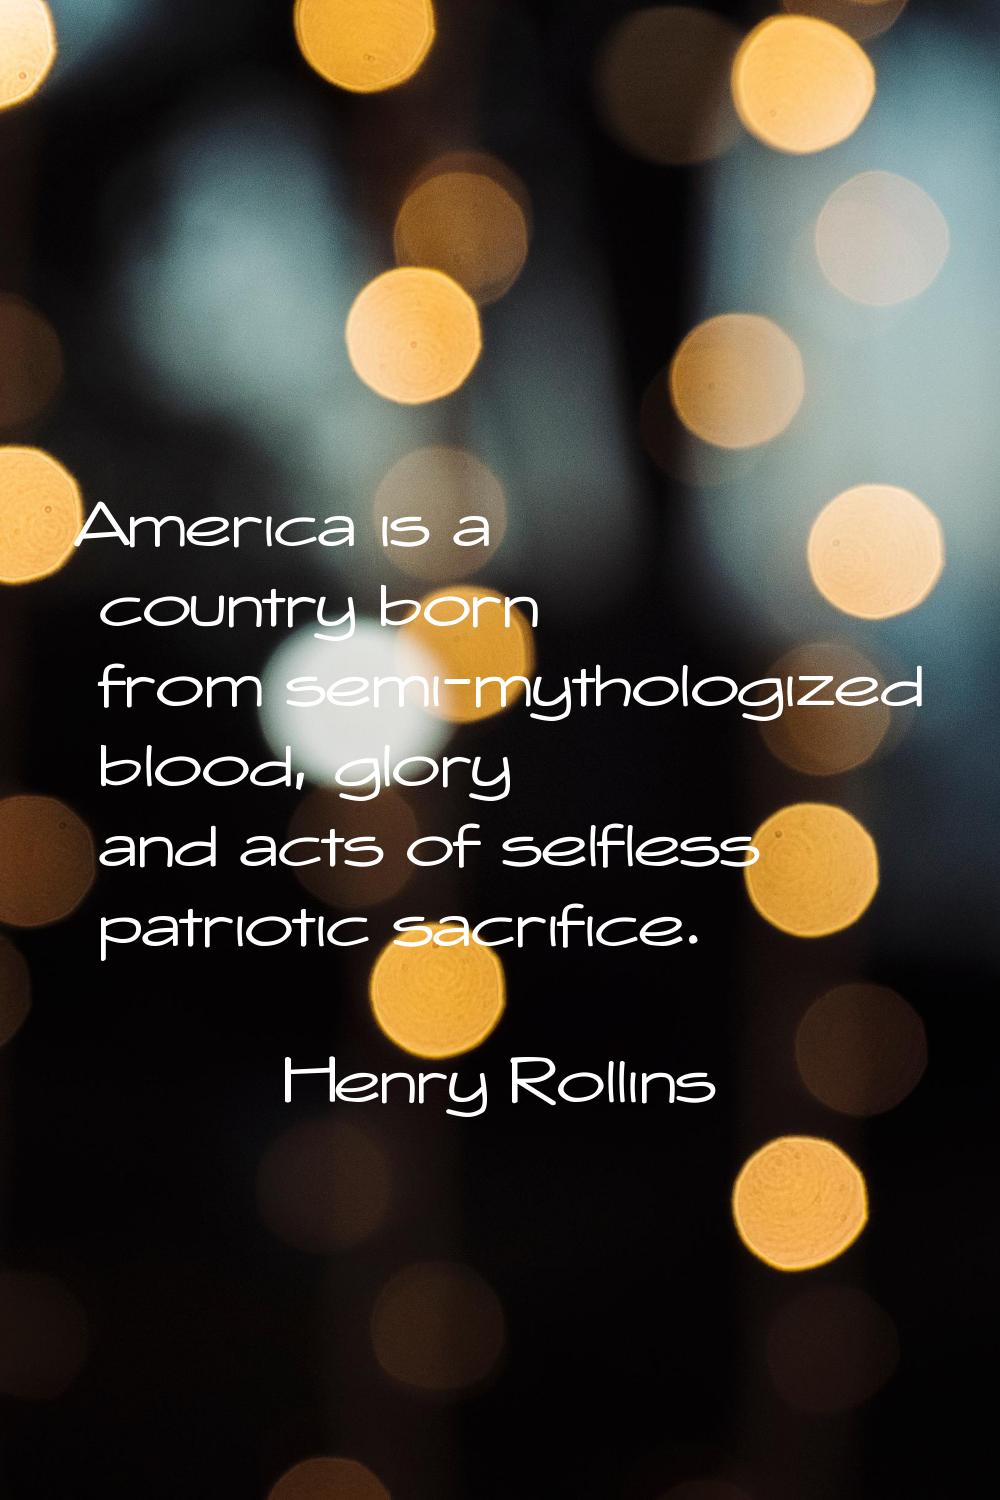 America is a country born from semi-mythologized blood, glory and acts of selfless patriotic sacrif